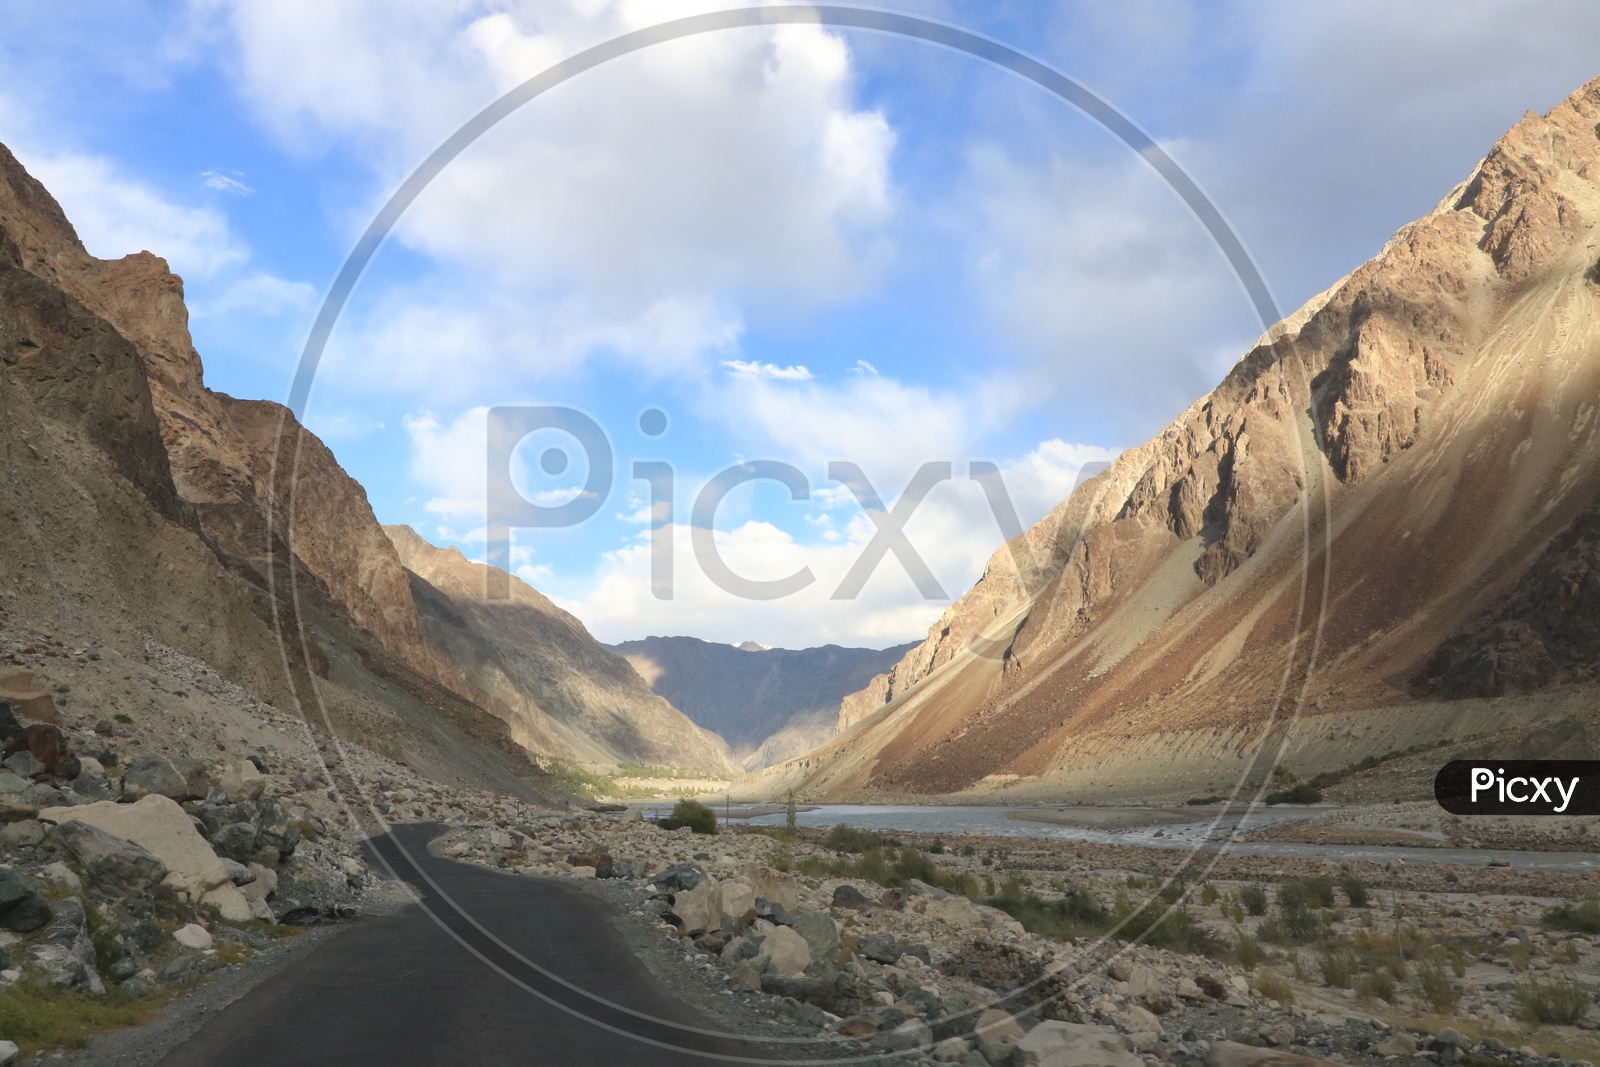 Roadways of leh with beautiful mountains and clouds in the background